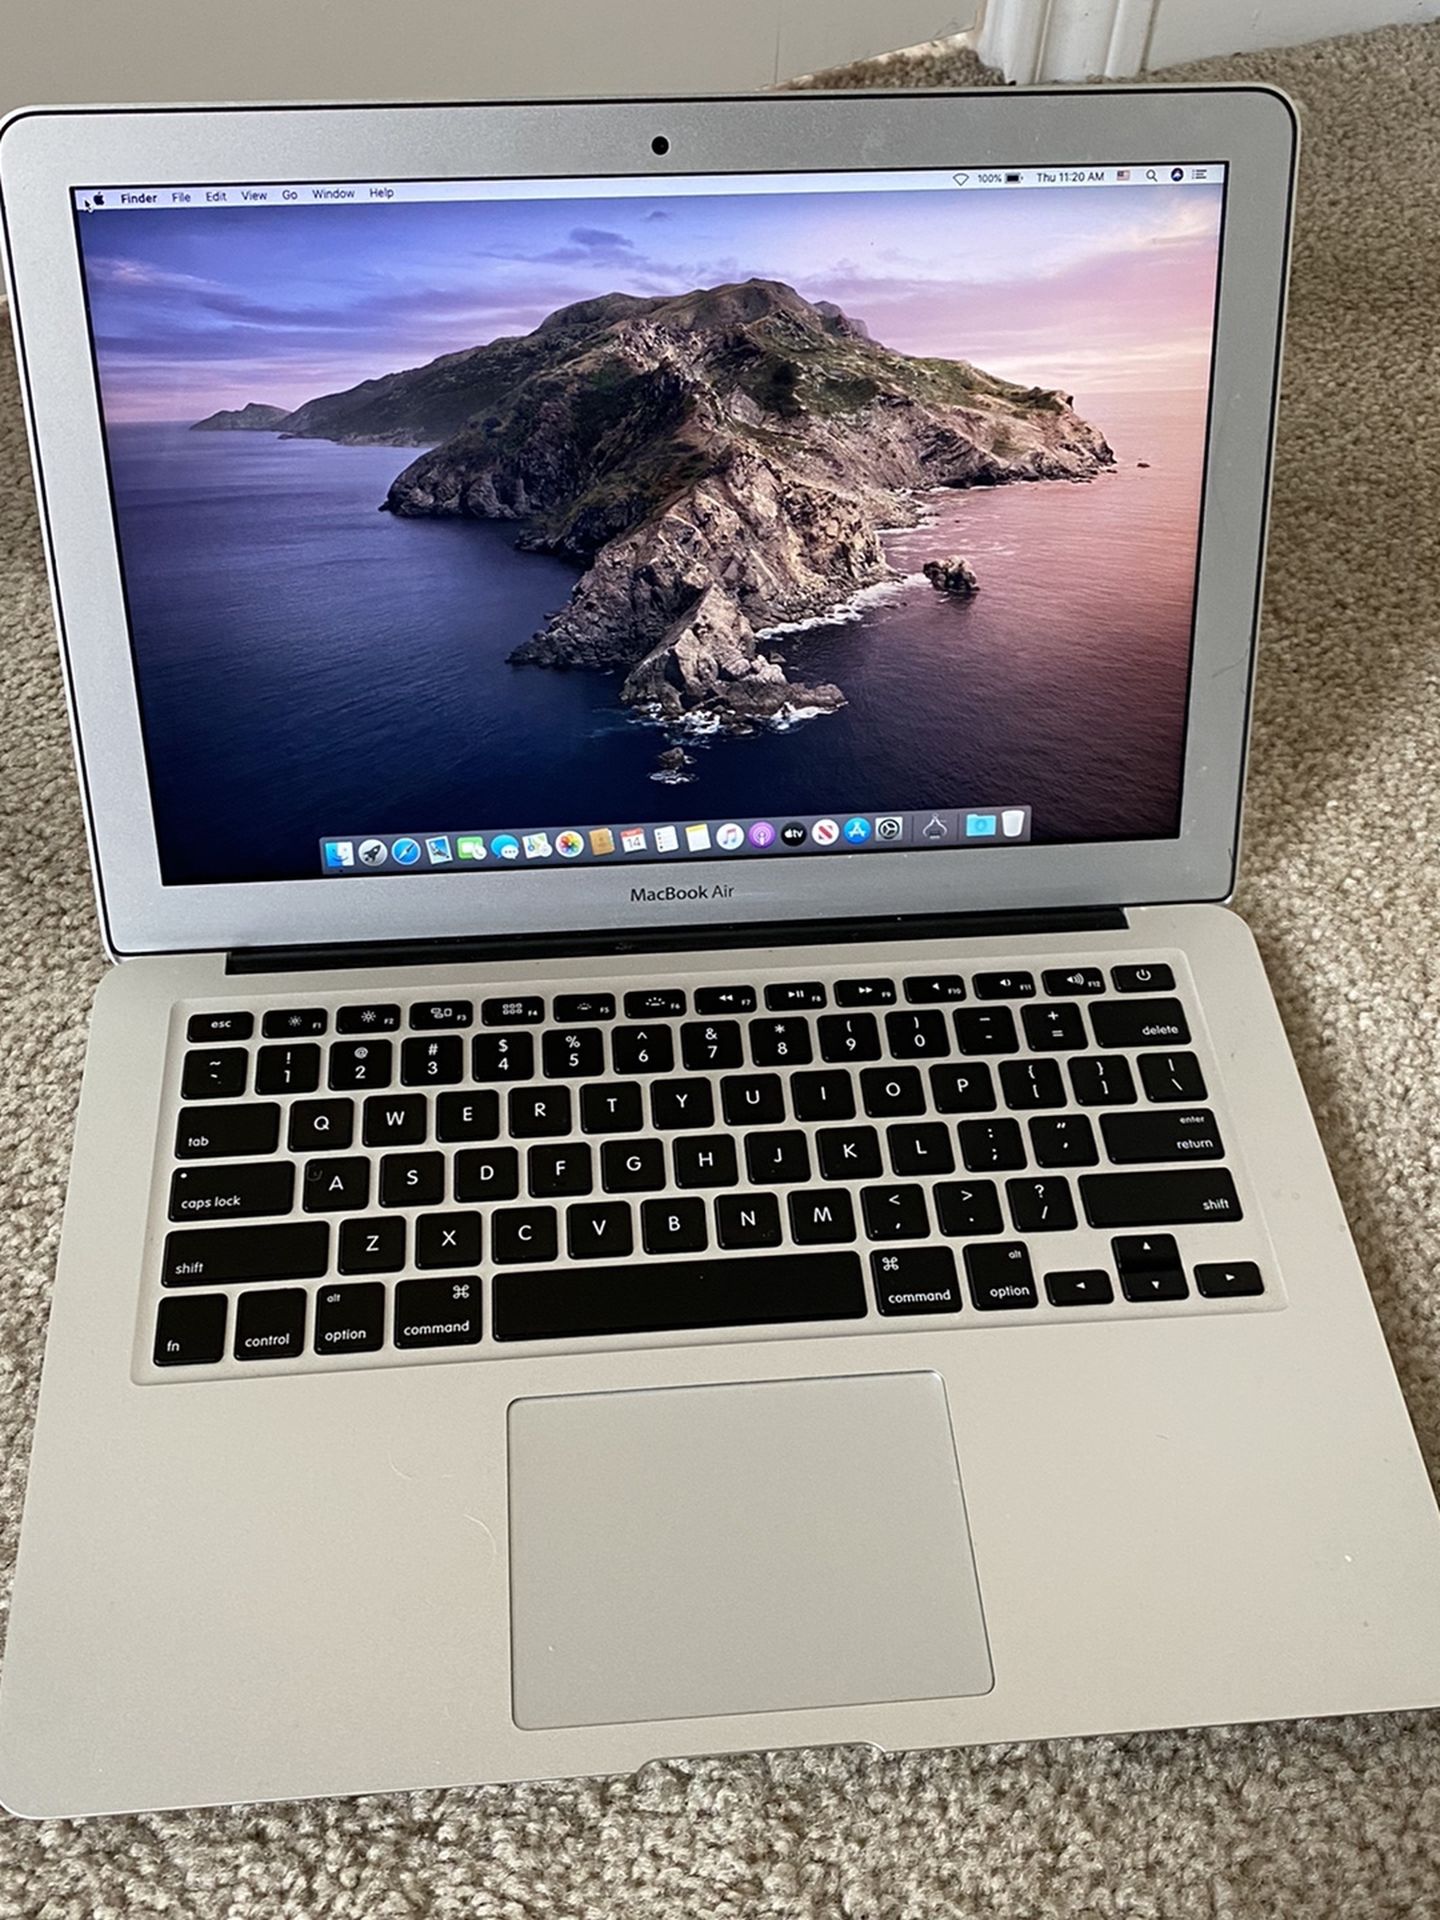 2017 Macbook Air 13 inch in Brand New Condition